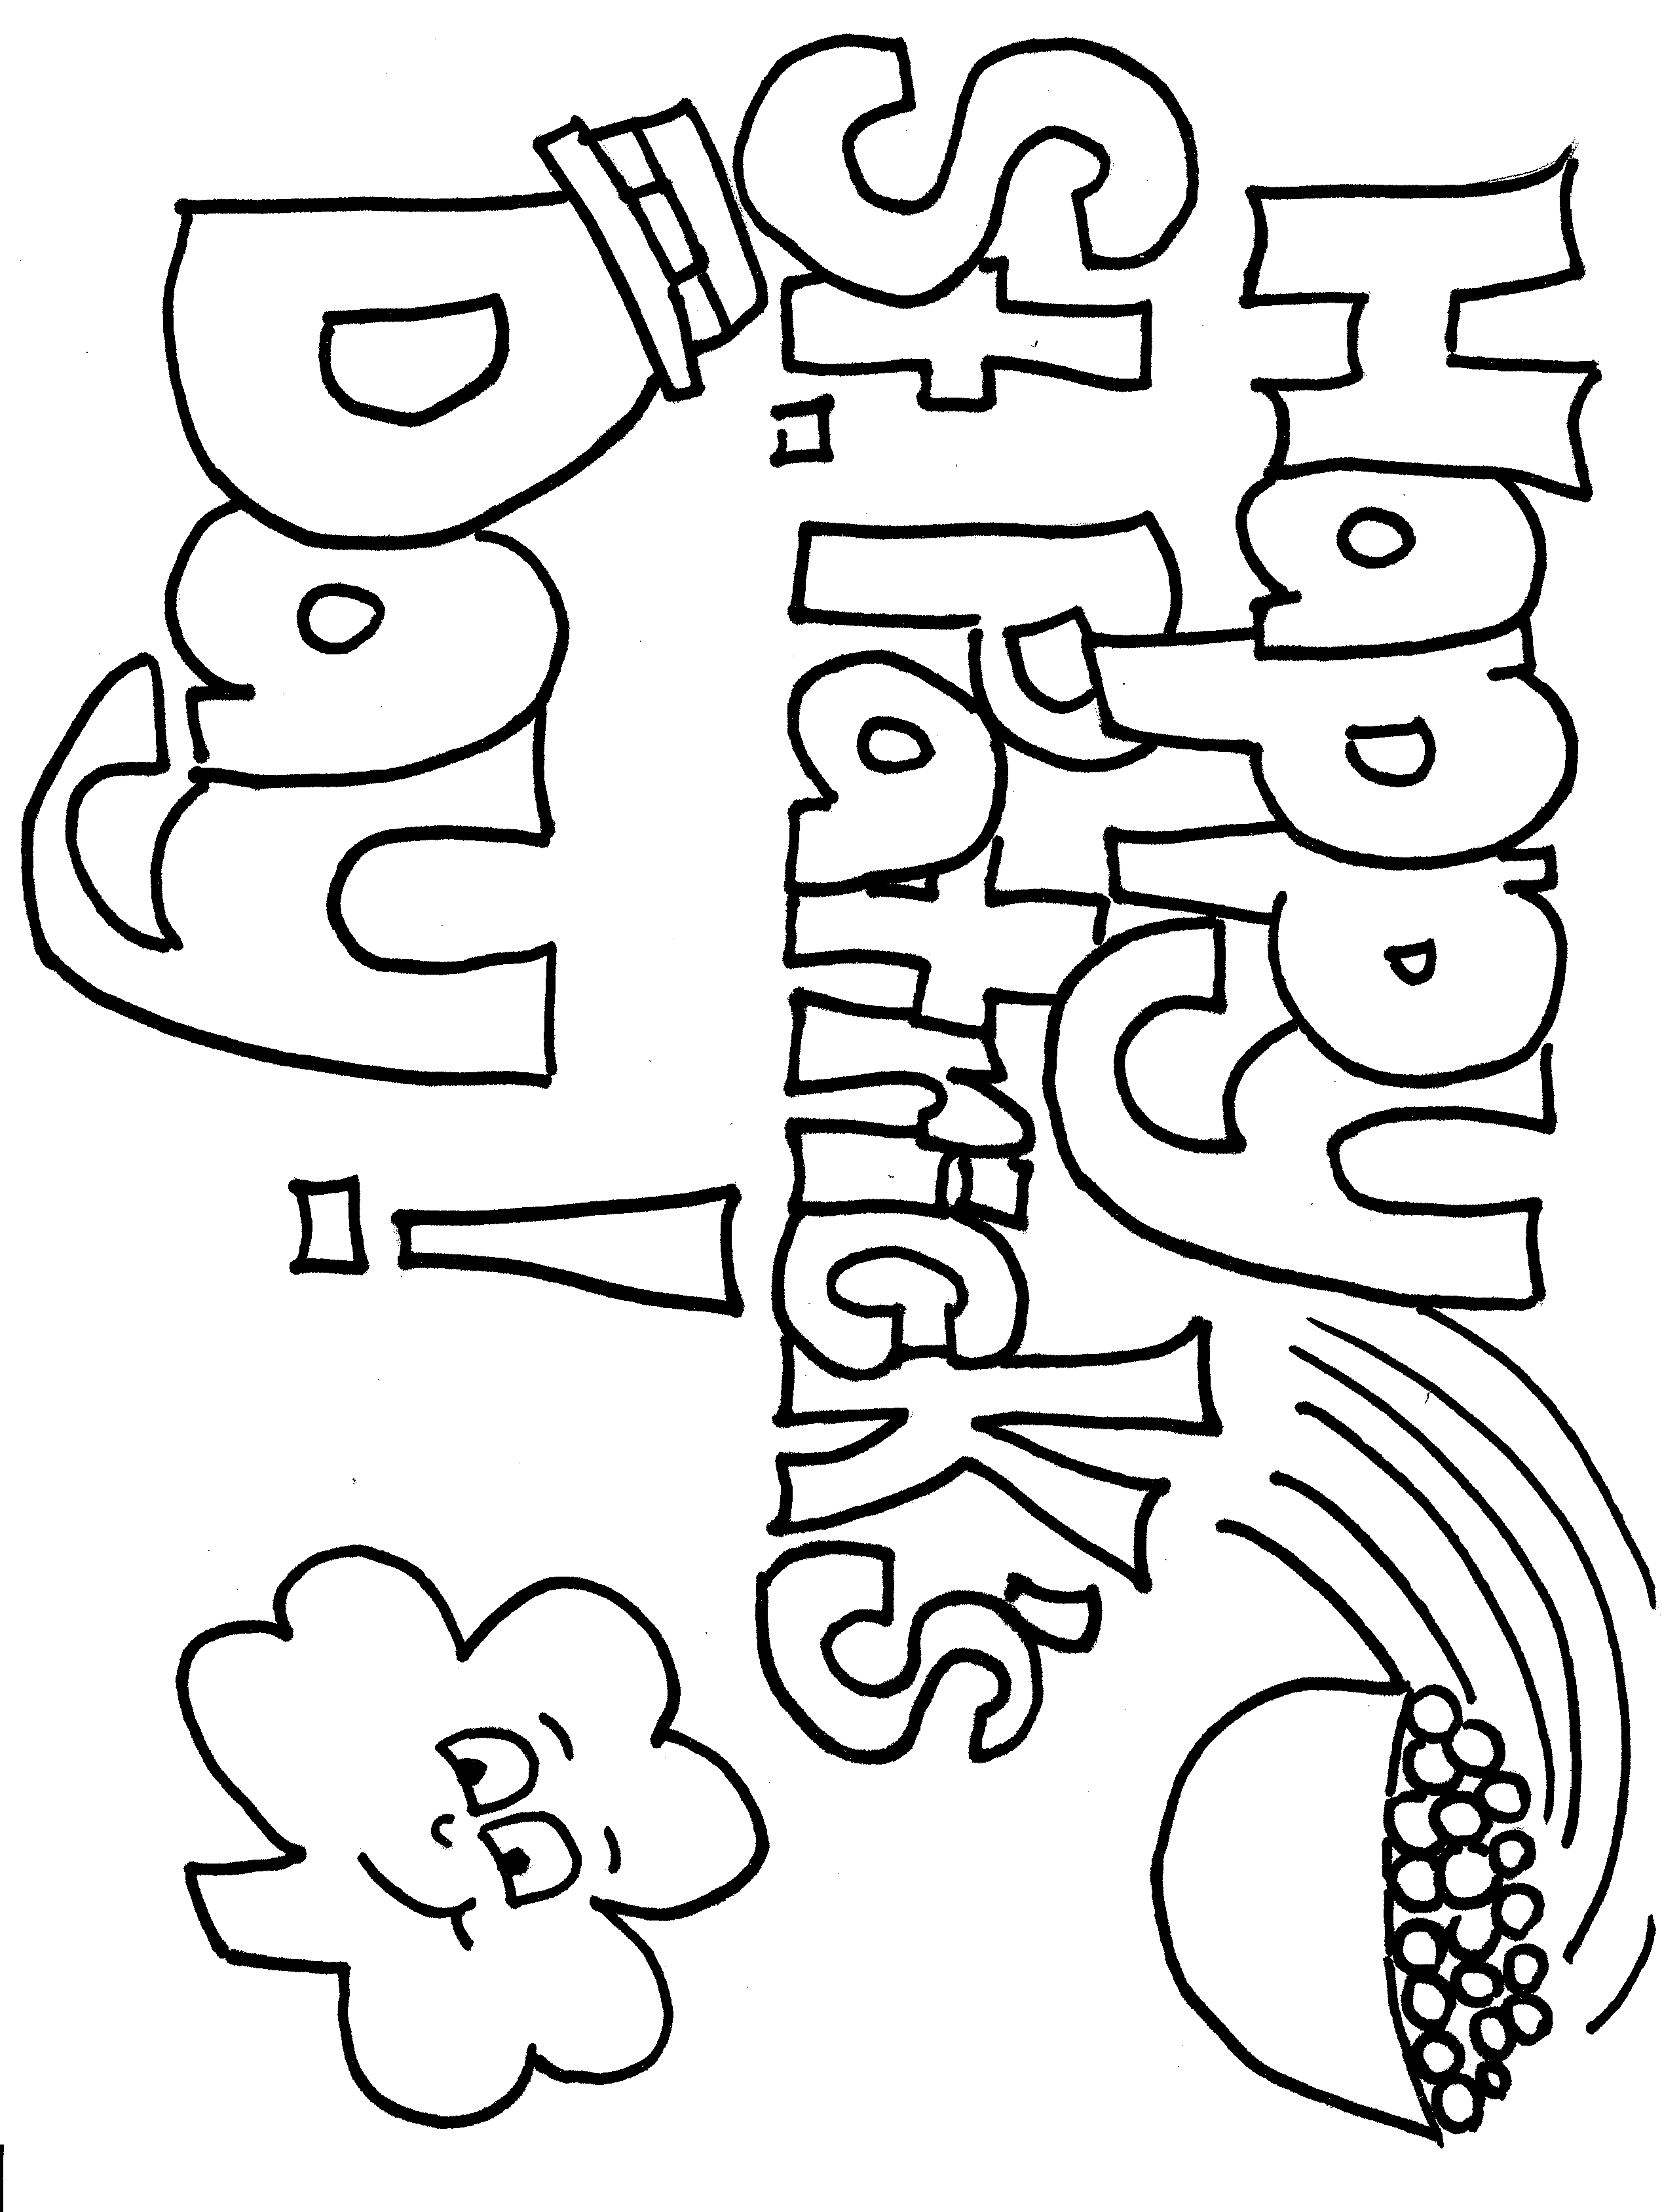 st-patrick-day-coloring-pages-for-kids-coloringpages321